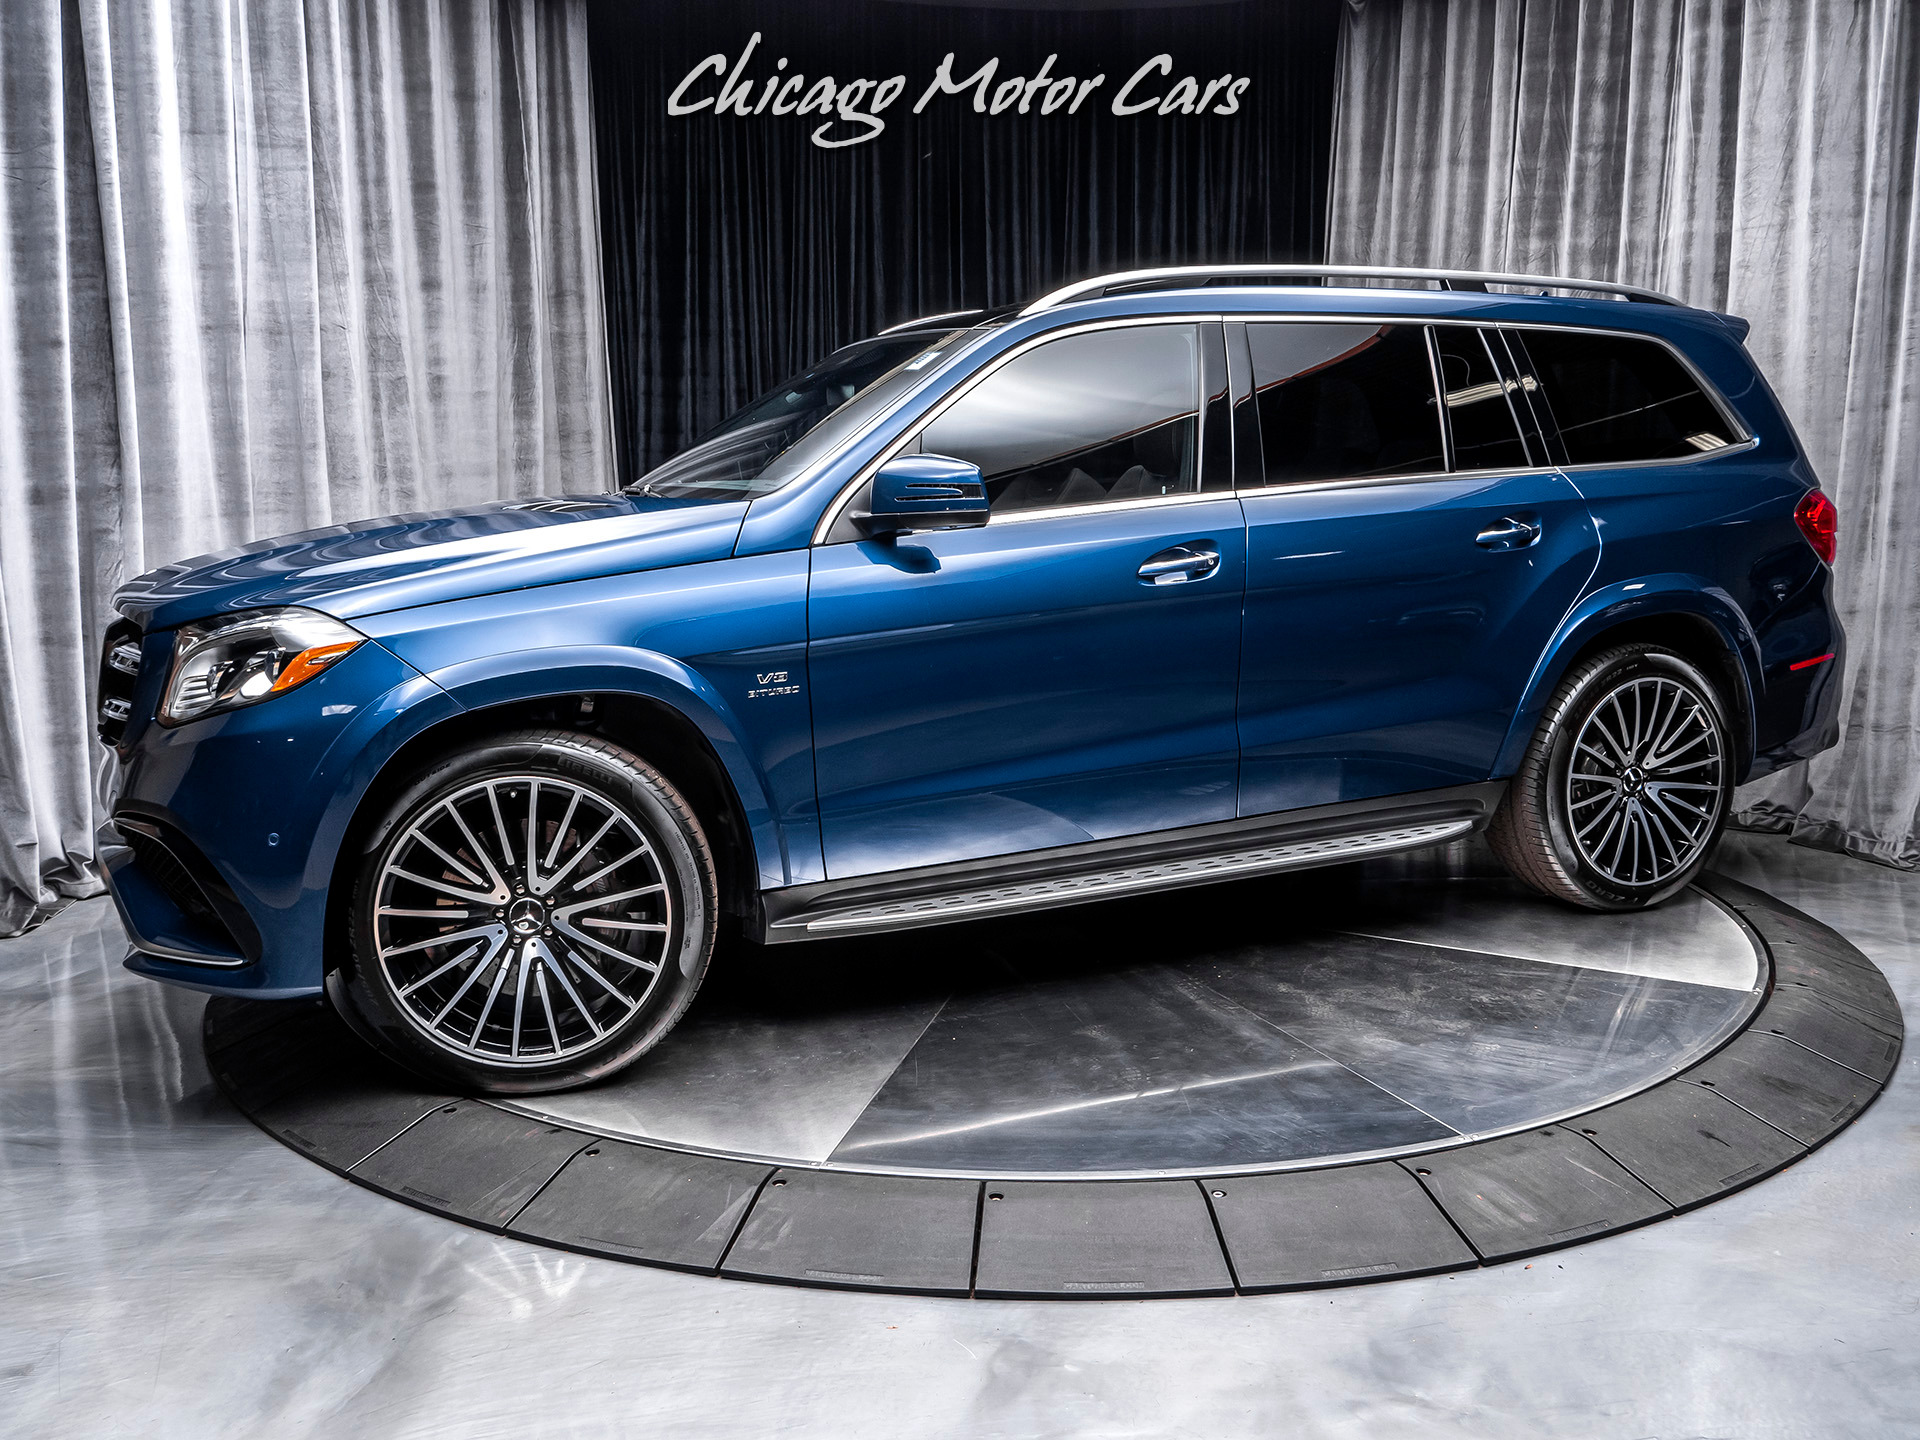 Used 2018 Mercedes-Benz GLS63 AMG **$135,050 MSRP** For Sale (Special  Pricing) | Chicago Motor Cars Stock #15983